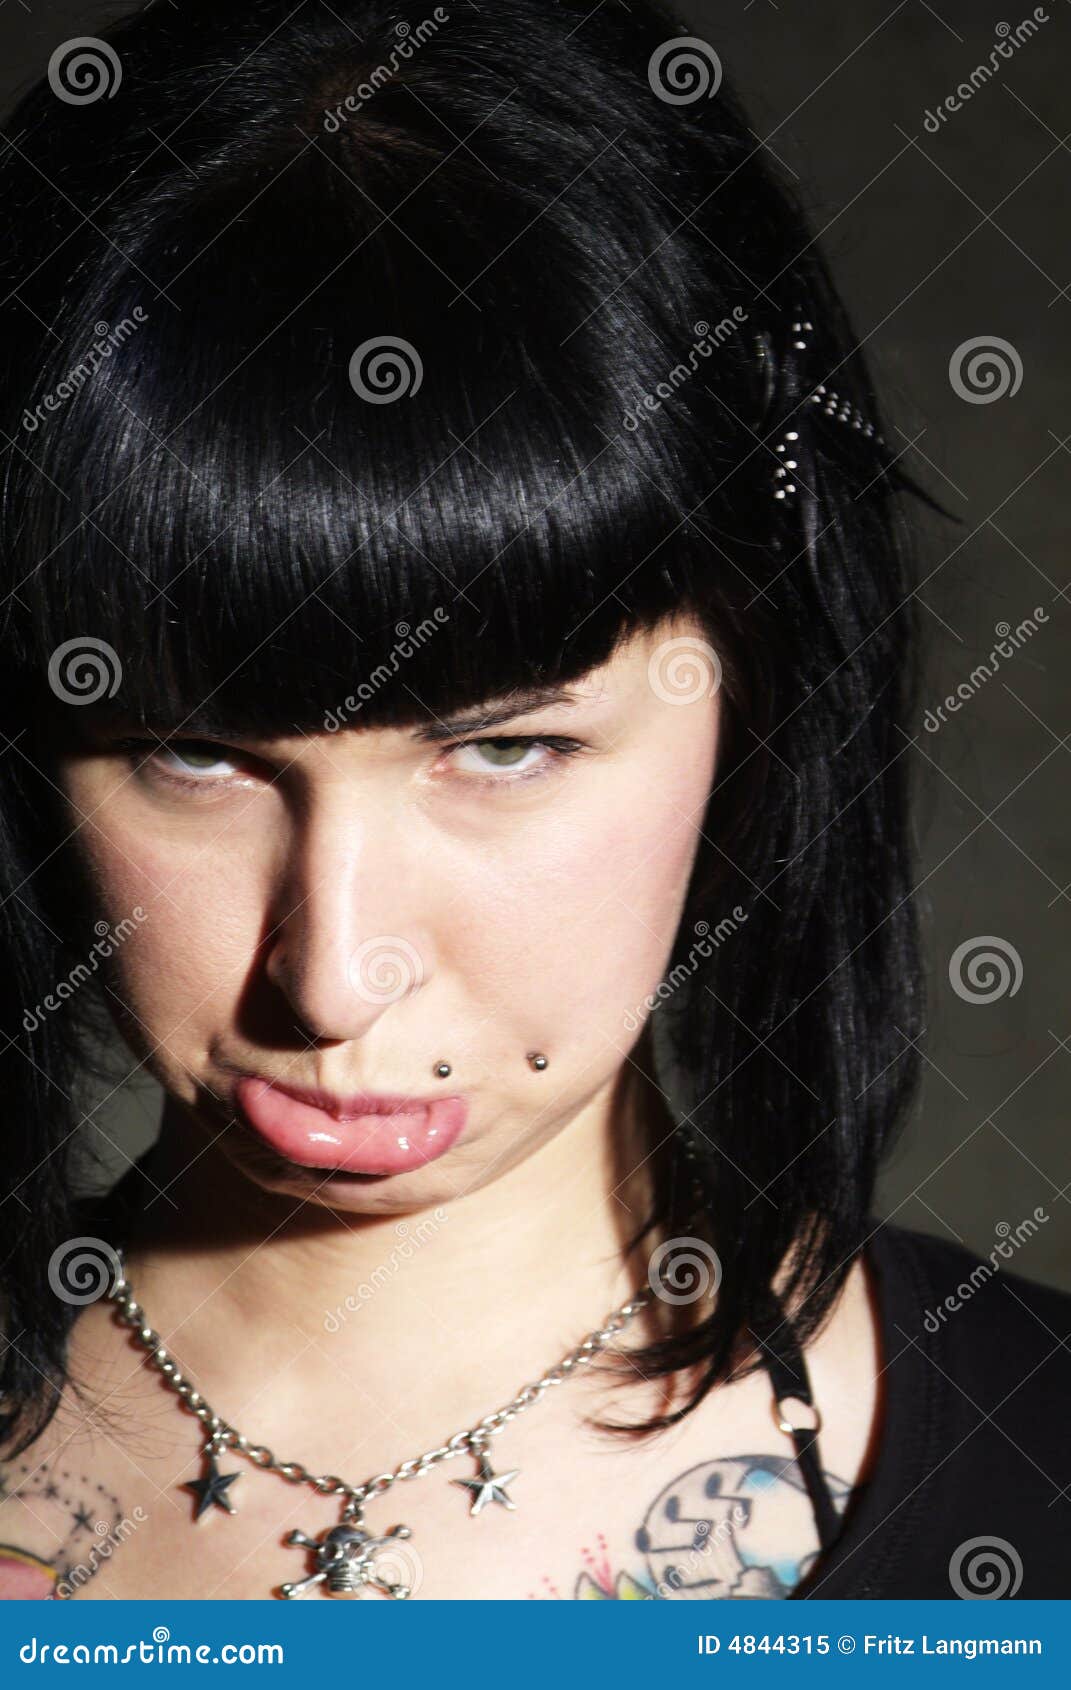 Insulted woman stock image. Image of latched, frustrated - 4844315